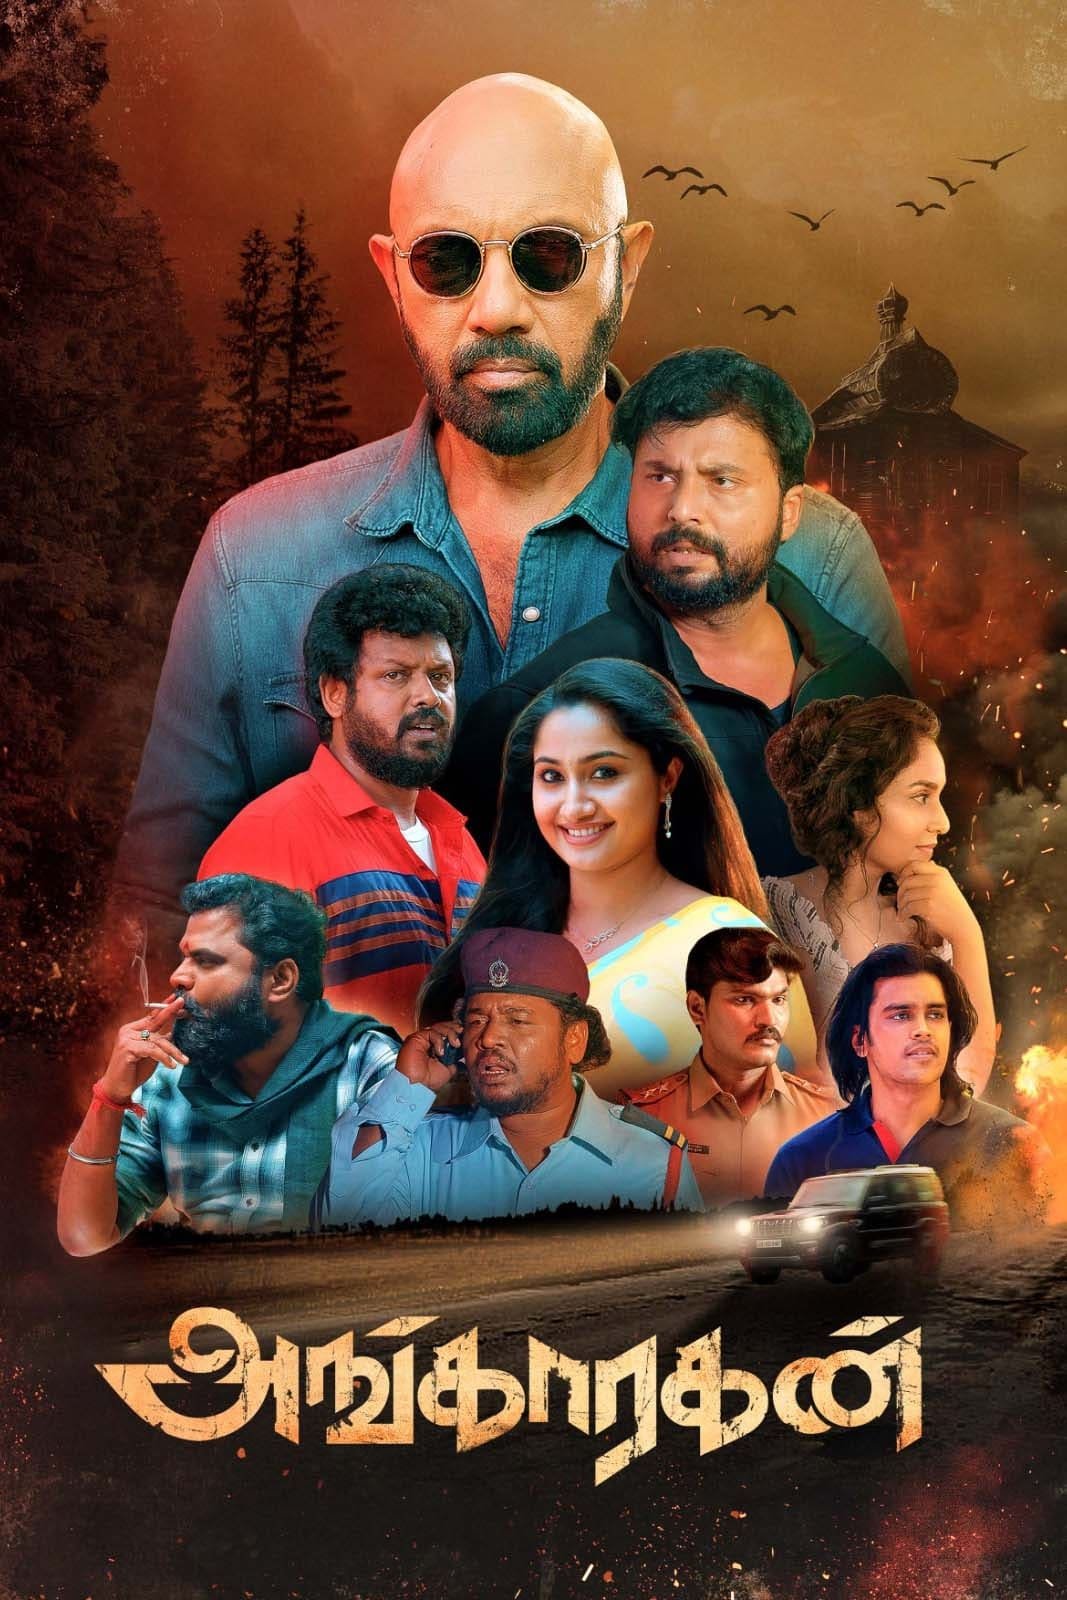 Poster for the movie "Angaaragan"